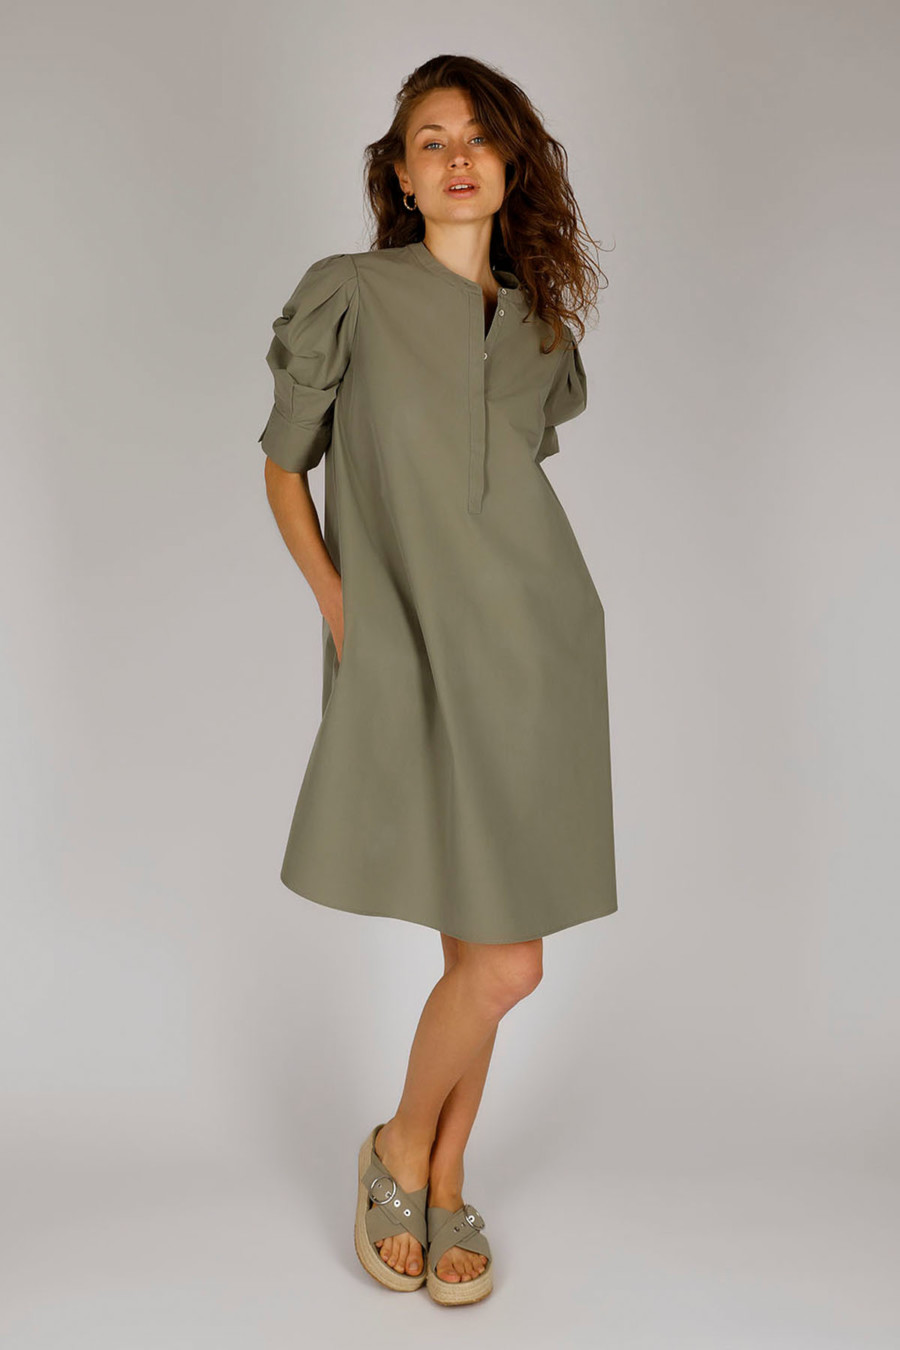 PHILIPA - Dress in sustainable organic cotton - Colour: Vetiver